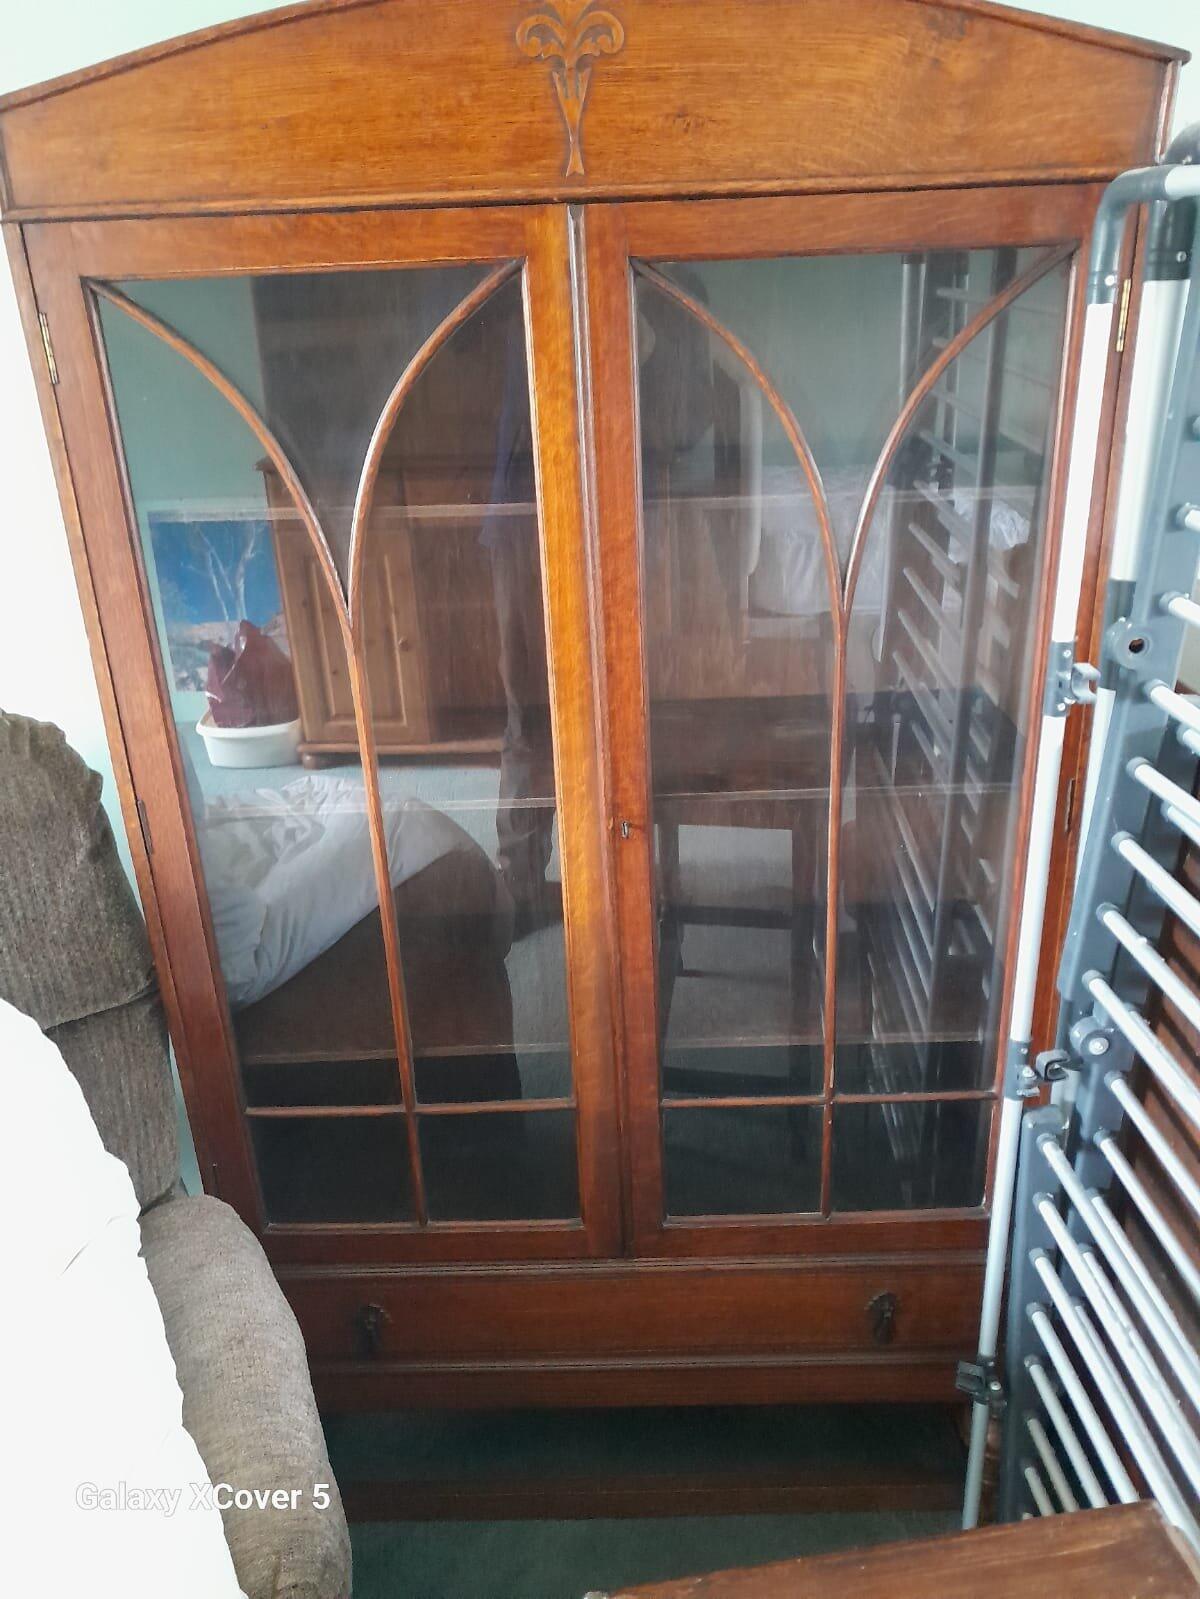 Display Cabinet For £10 In Fownhope, Engl For Sale  Free — Nextdoor